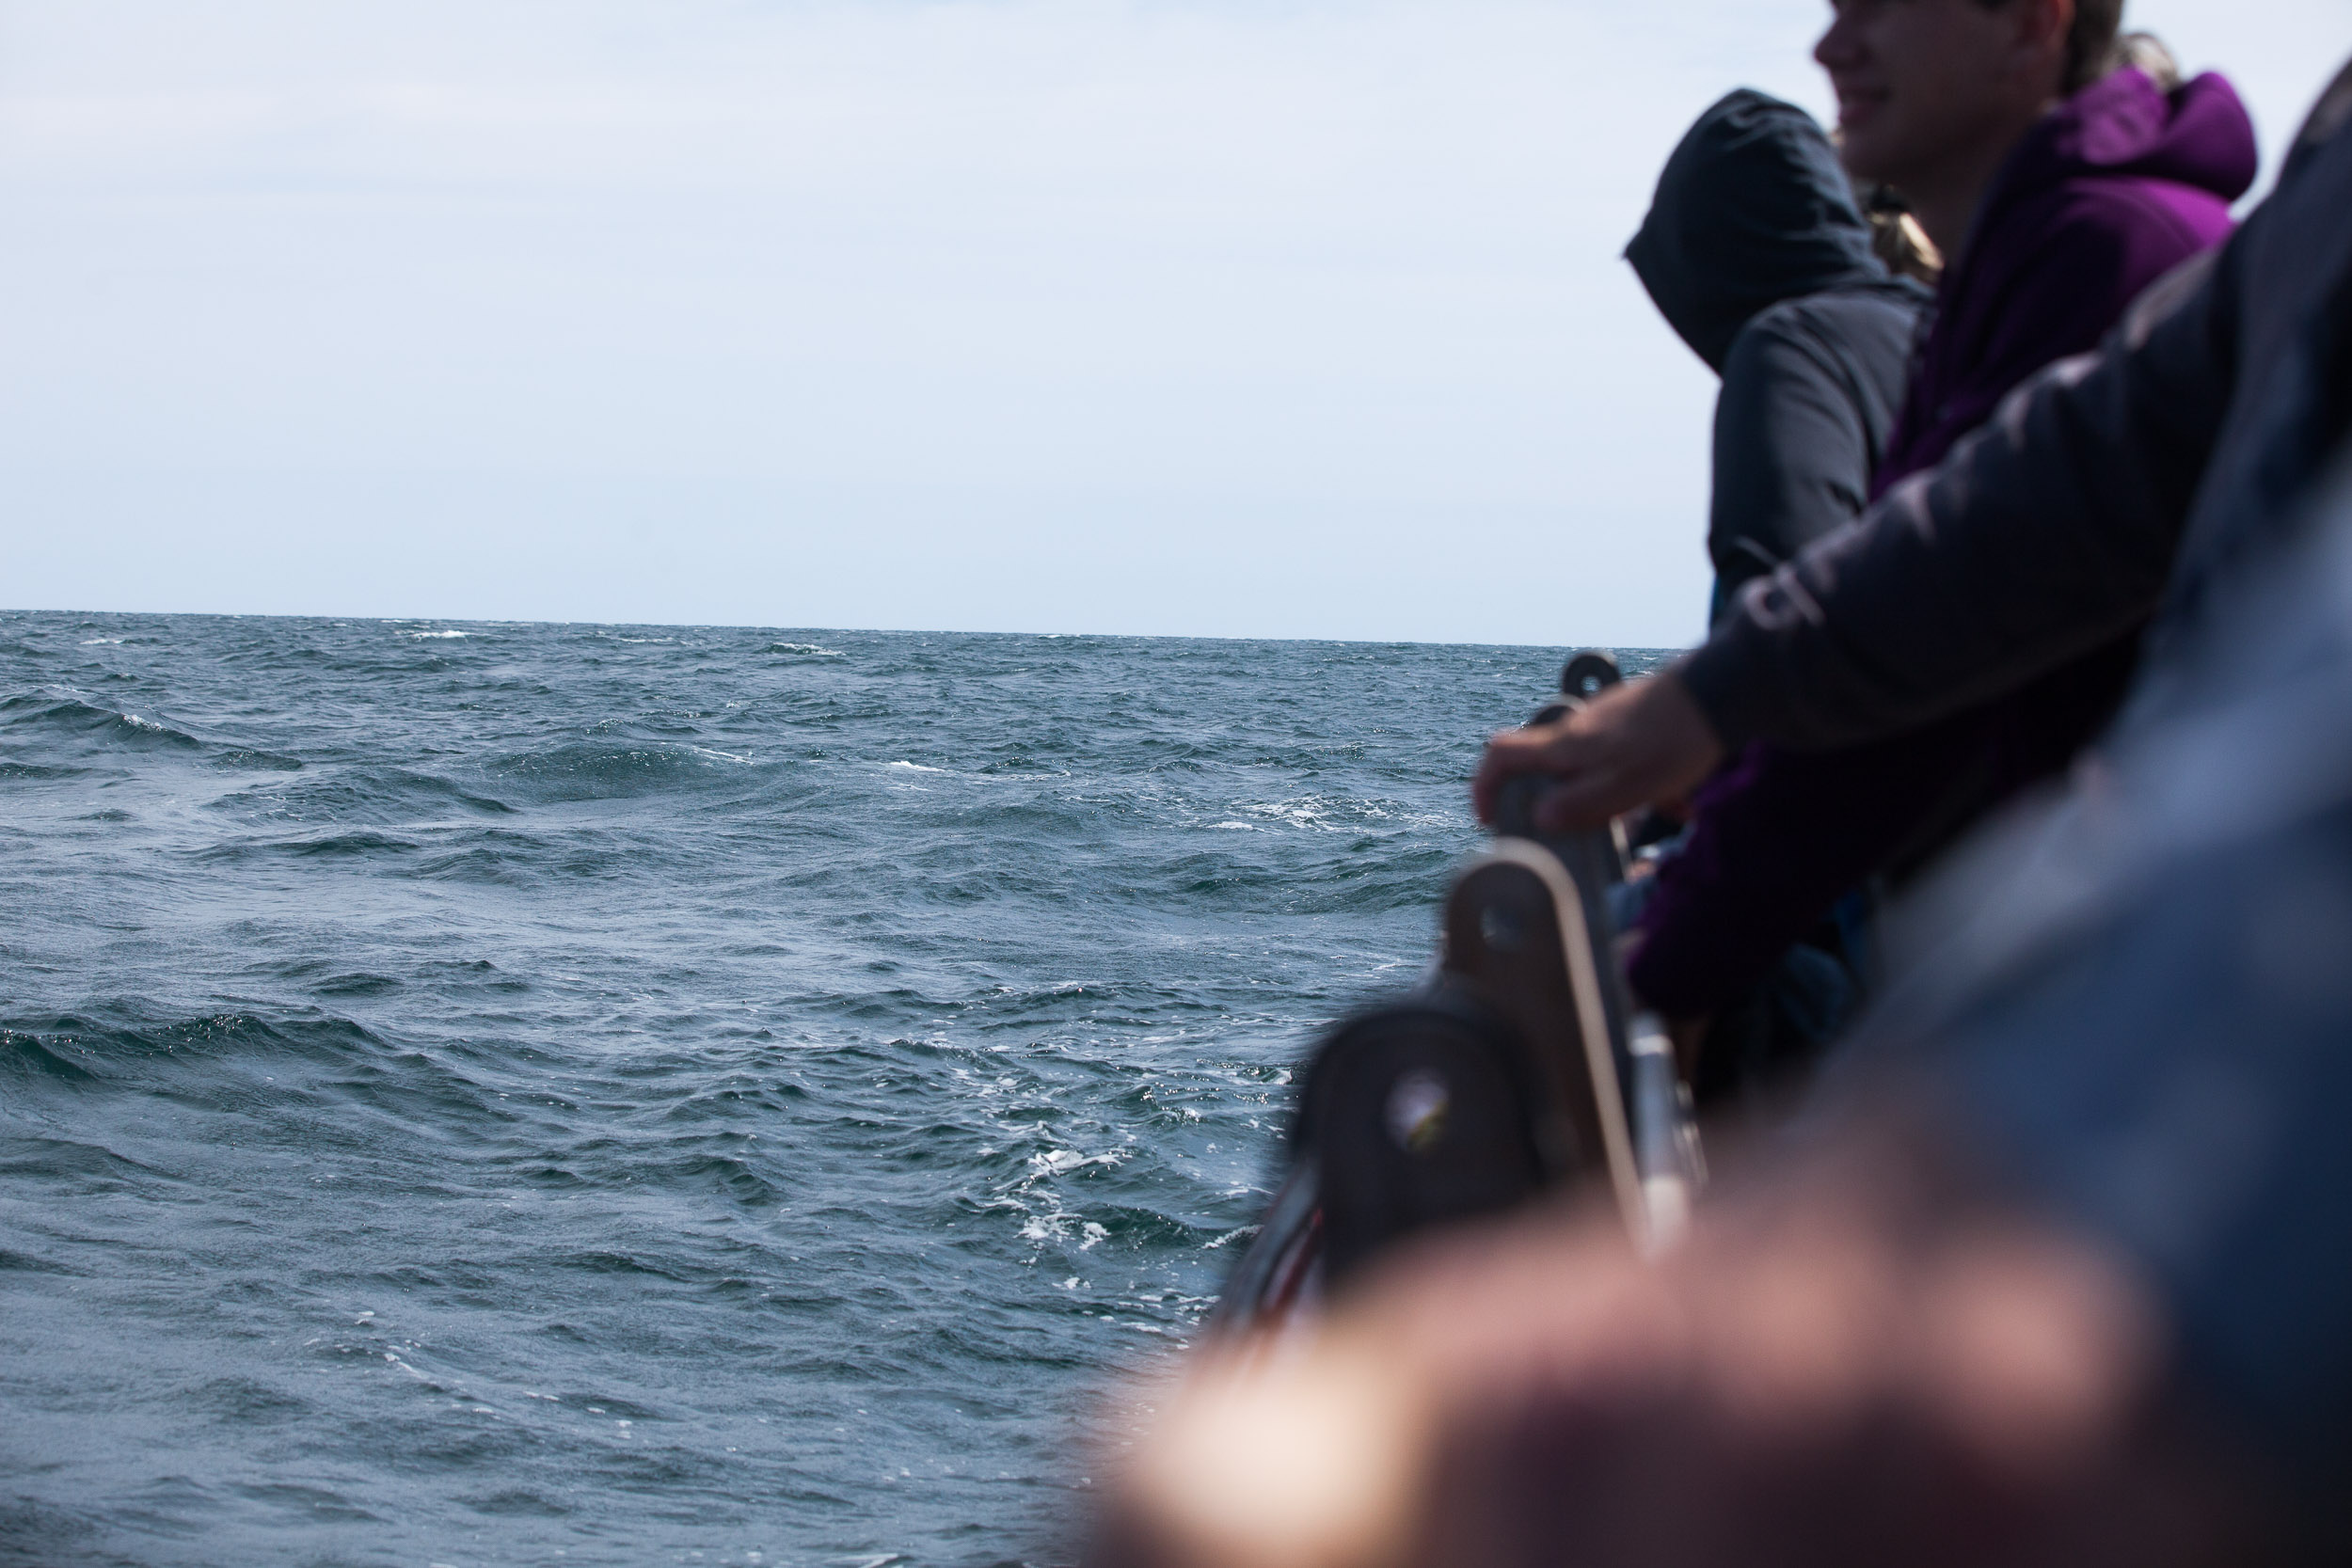 Whale watchers on the side of a boat looking into the ocean- travel photography cape breton nova scotia for re:porter magazine